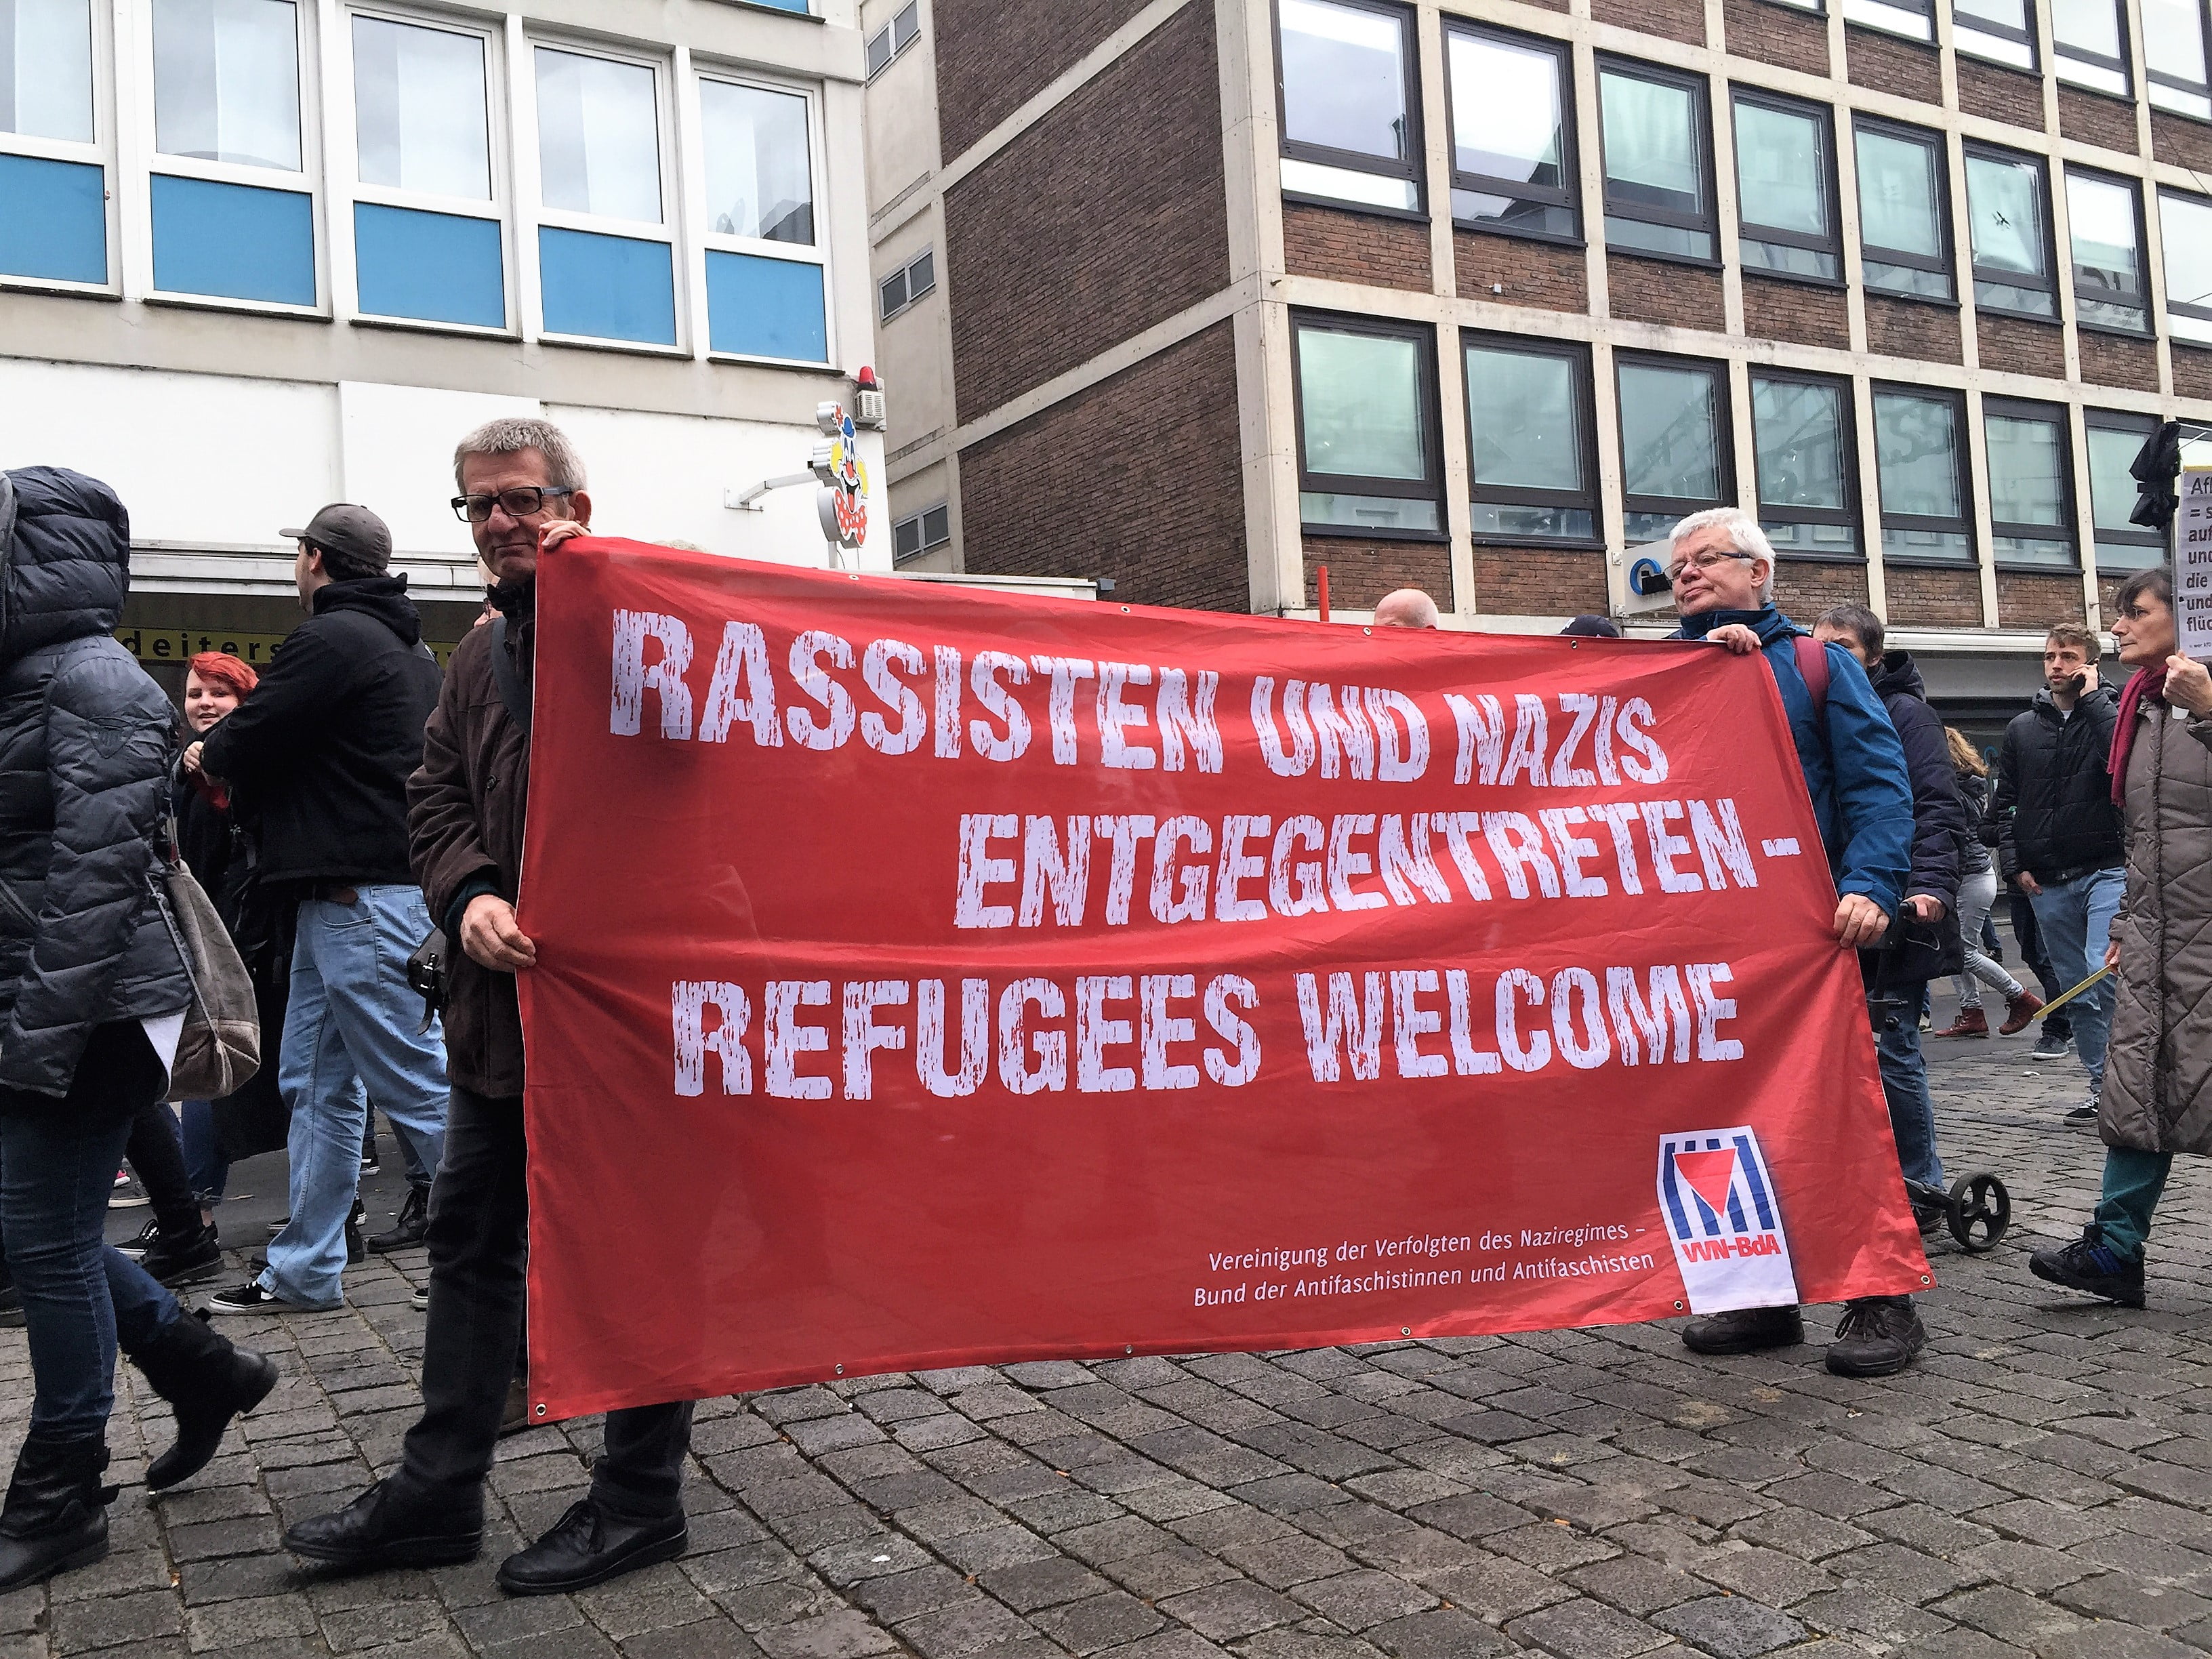 Rassismus Nazis Regugees welcome